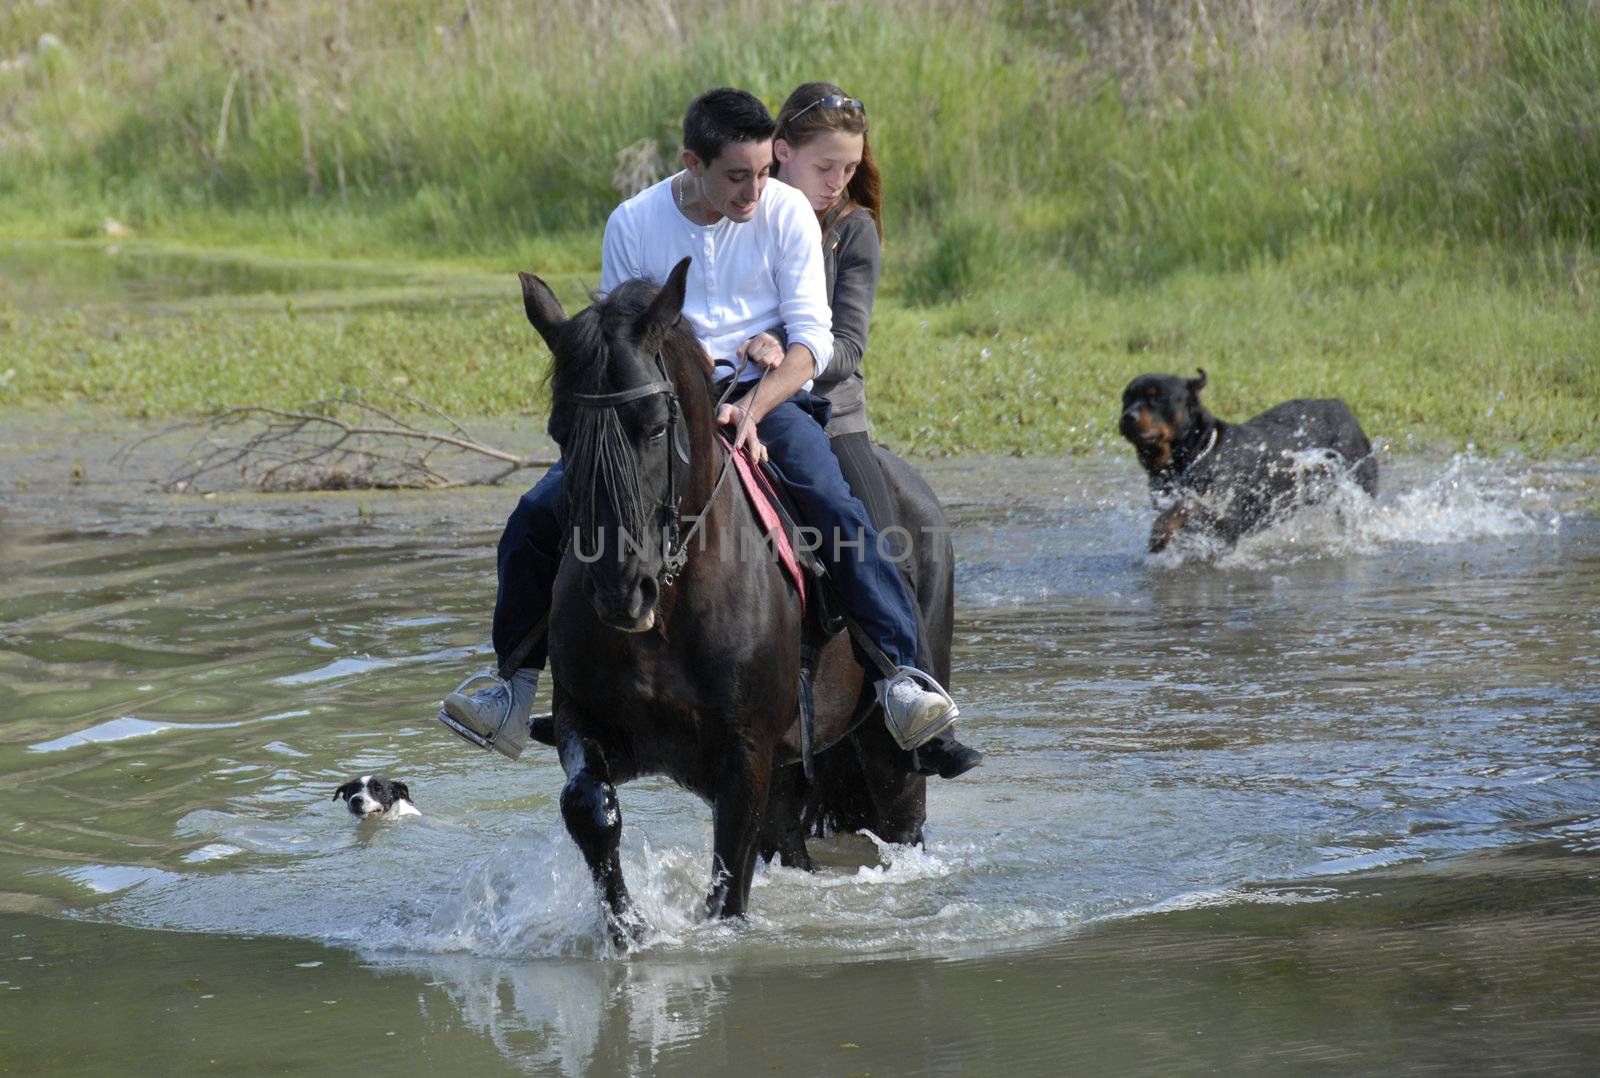 riding couple in a river with dogs by cynoclub